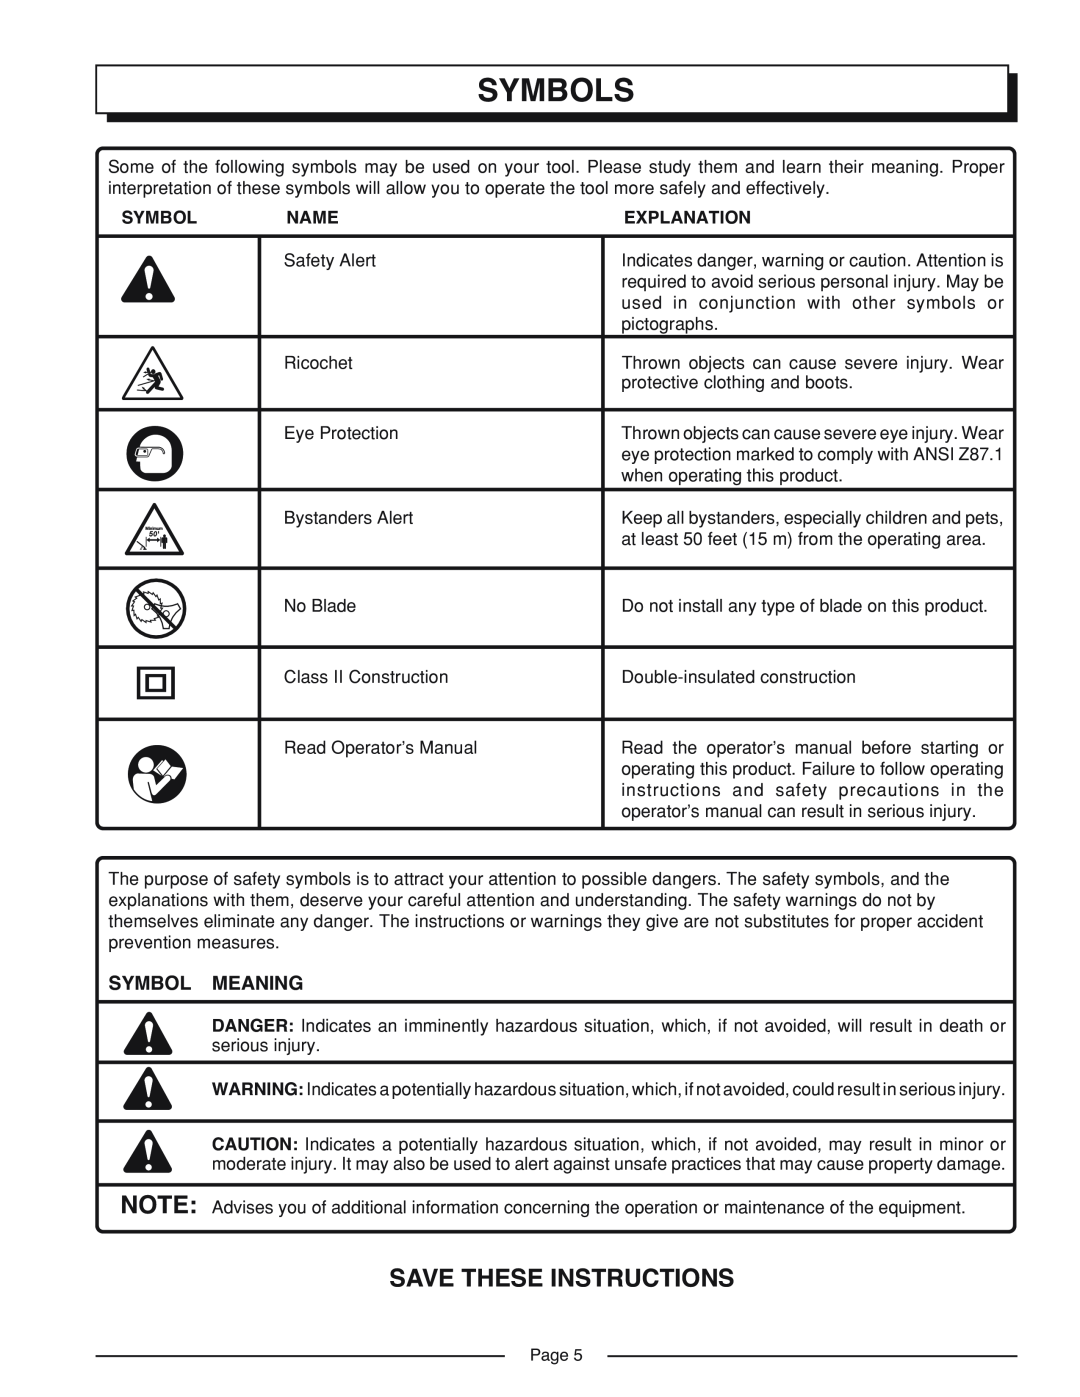 Homelite UT41002A manual Symbols, Save These Instructions, Symbol Meaning, Name, Explanation, Page 